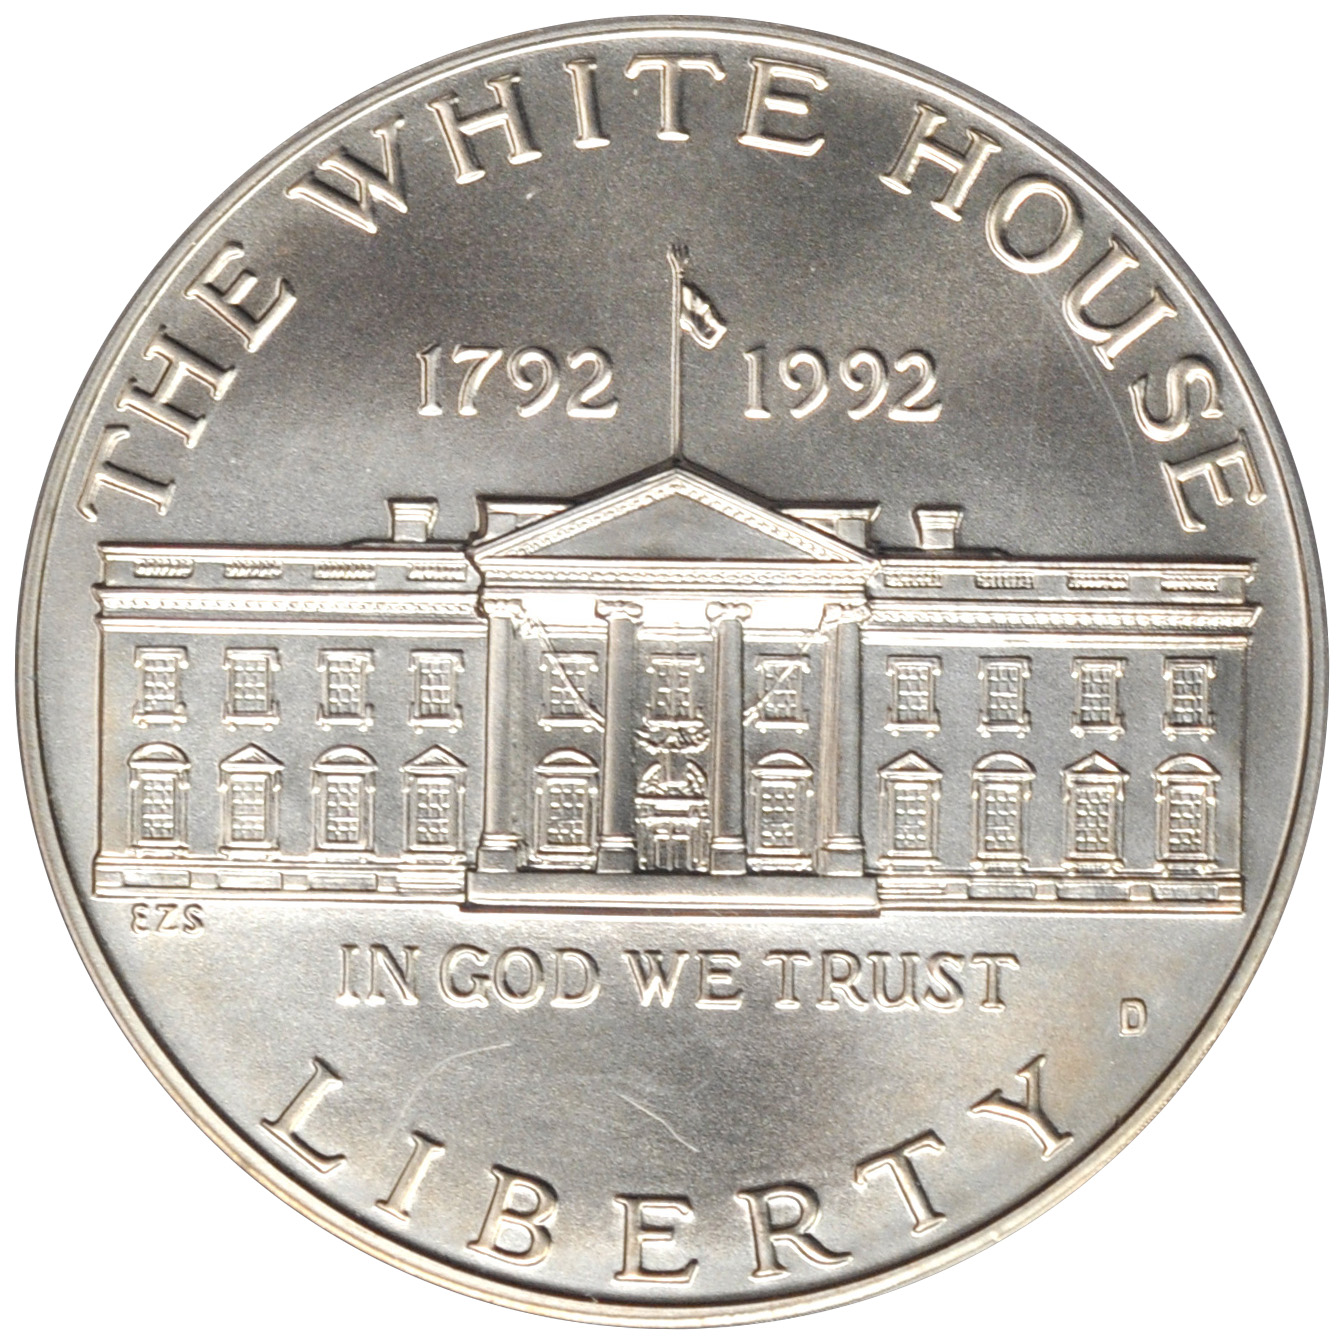 1992 W US Modern Silver Commemorative Proof Dollar White House